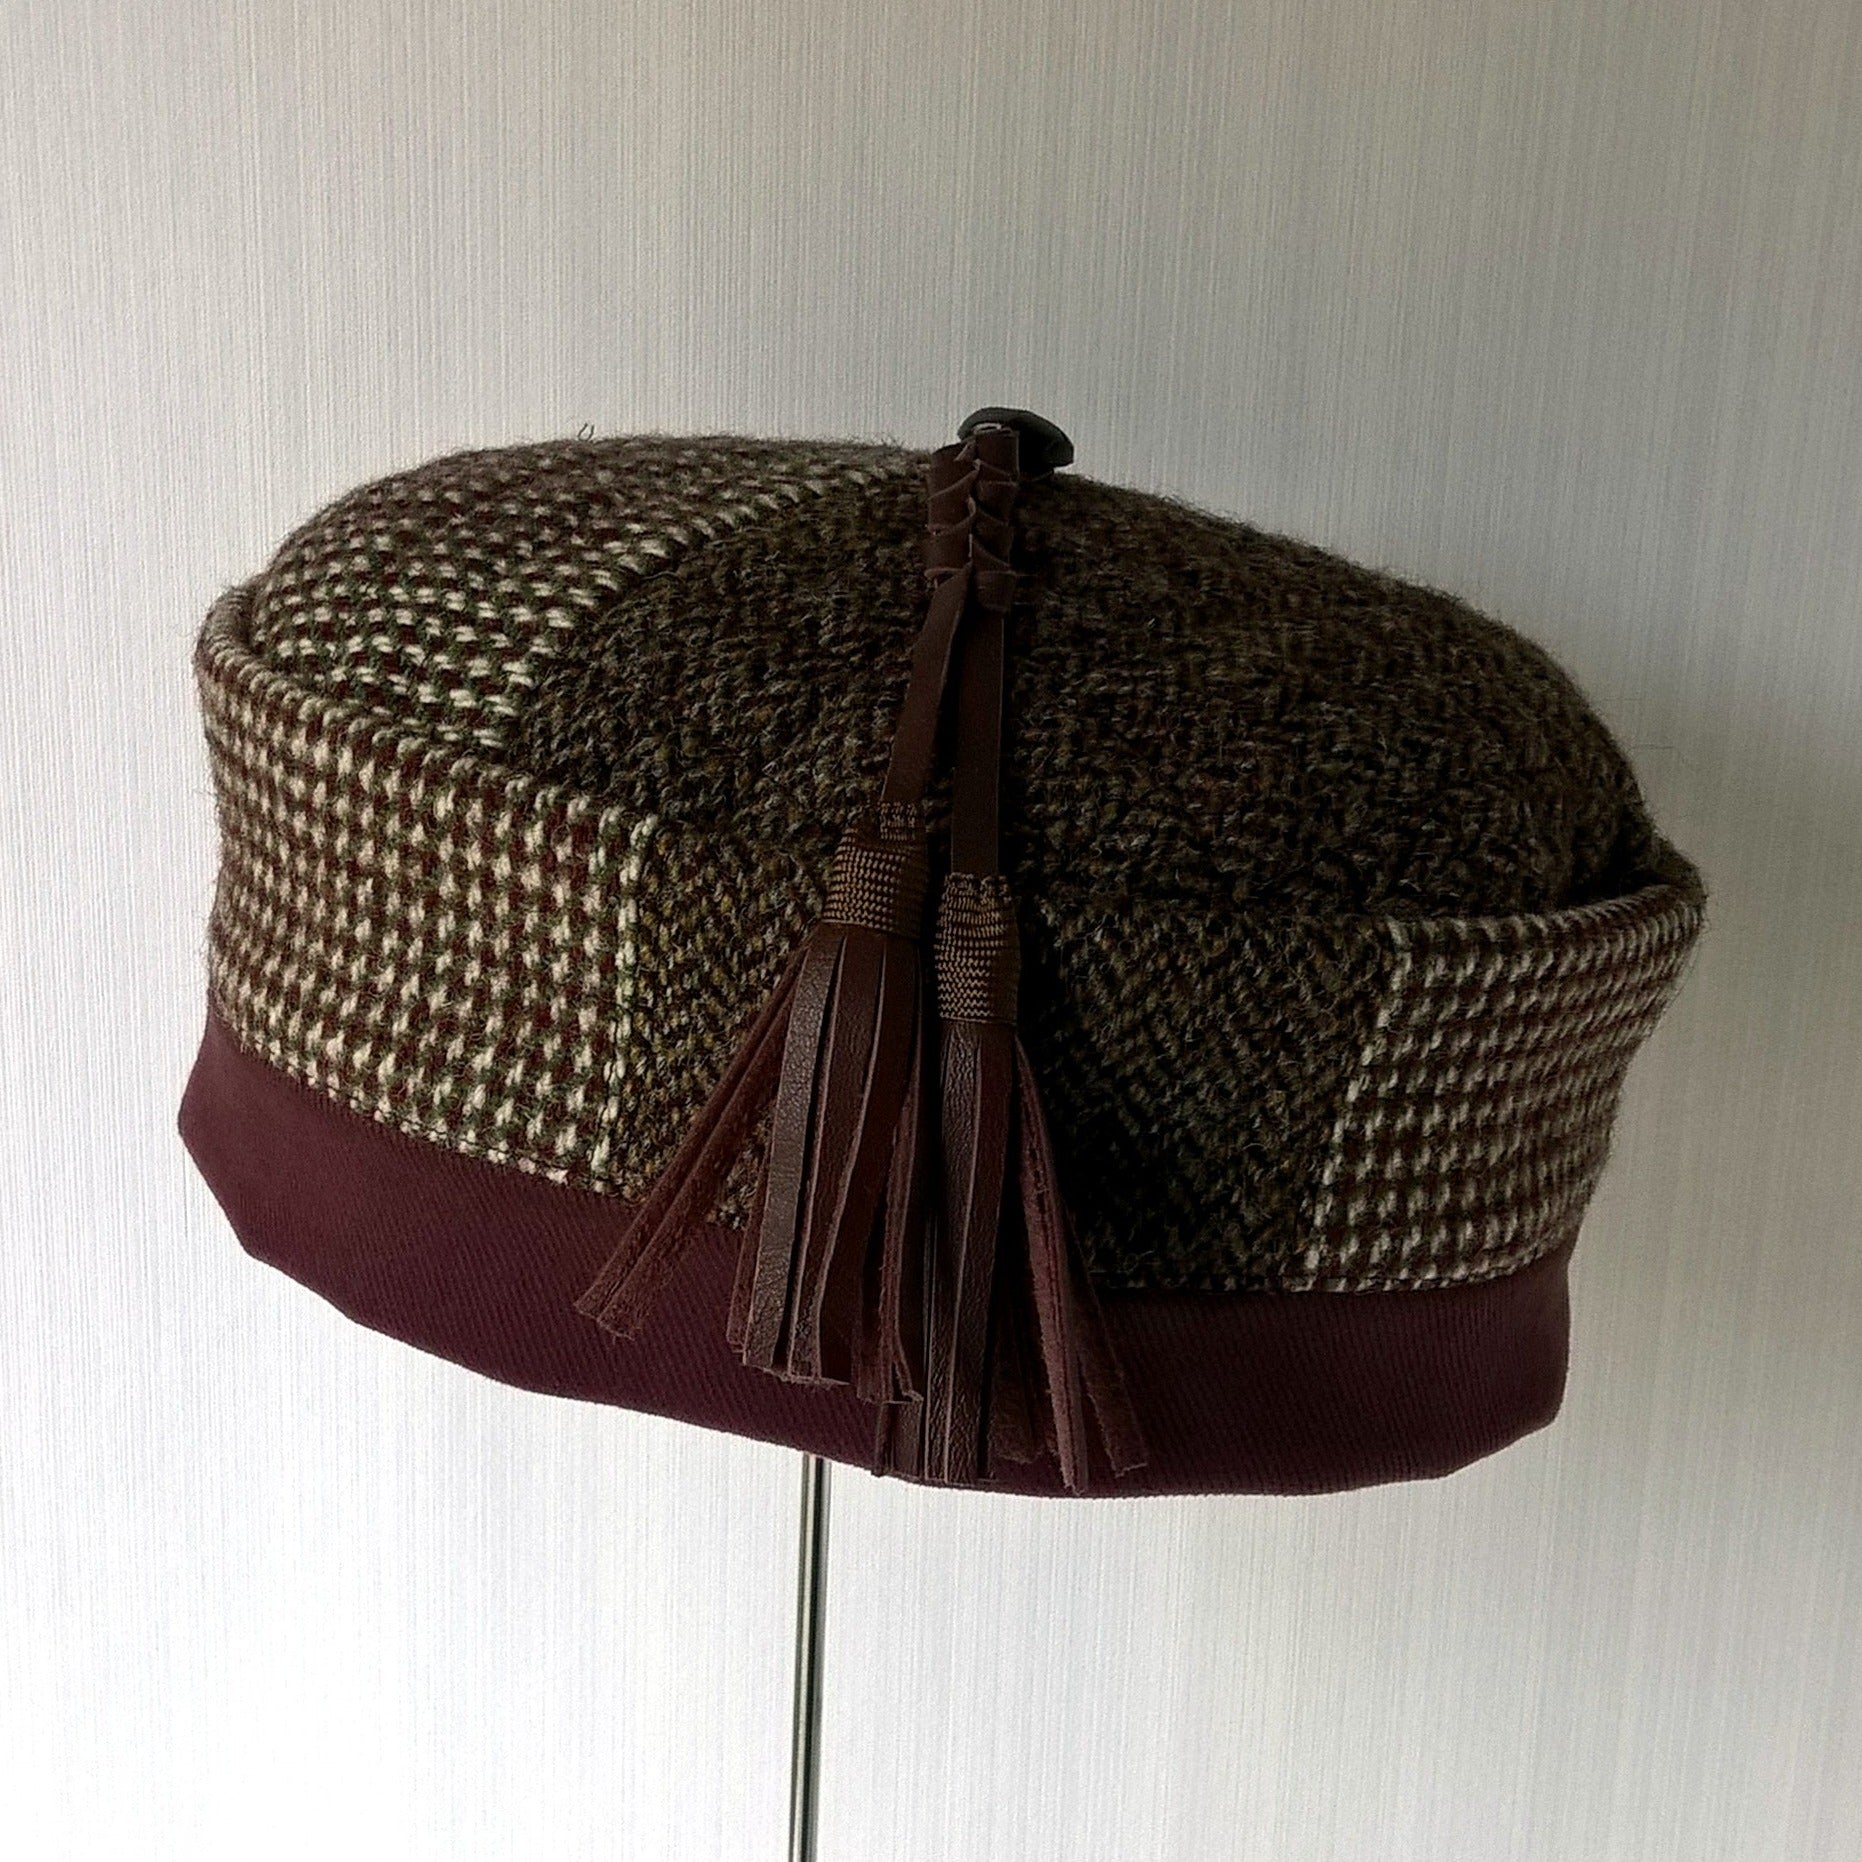 Mismatched tweed smoking cap with leather  macrame tassel